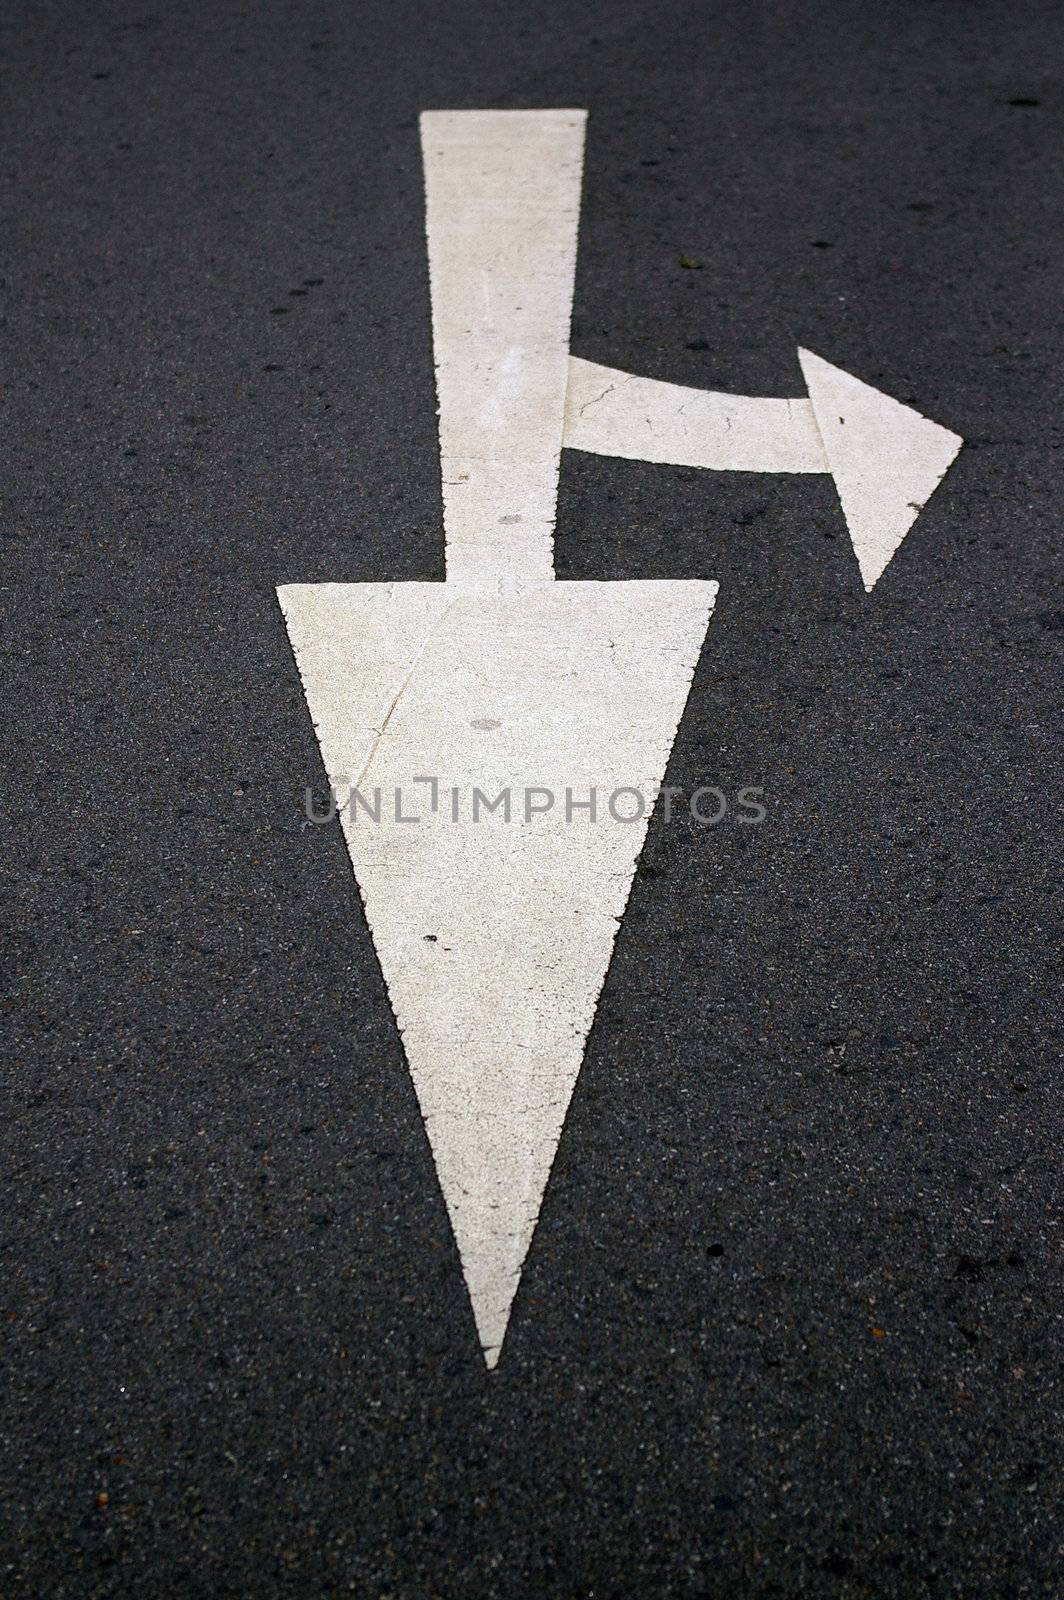 Moving forward and turn left sign